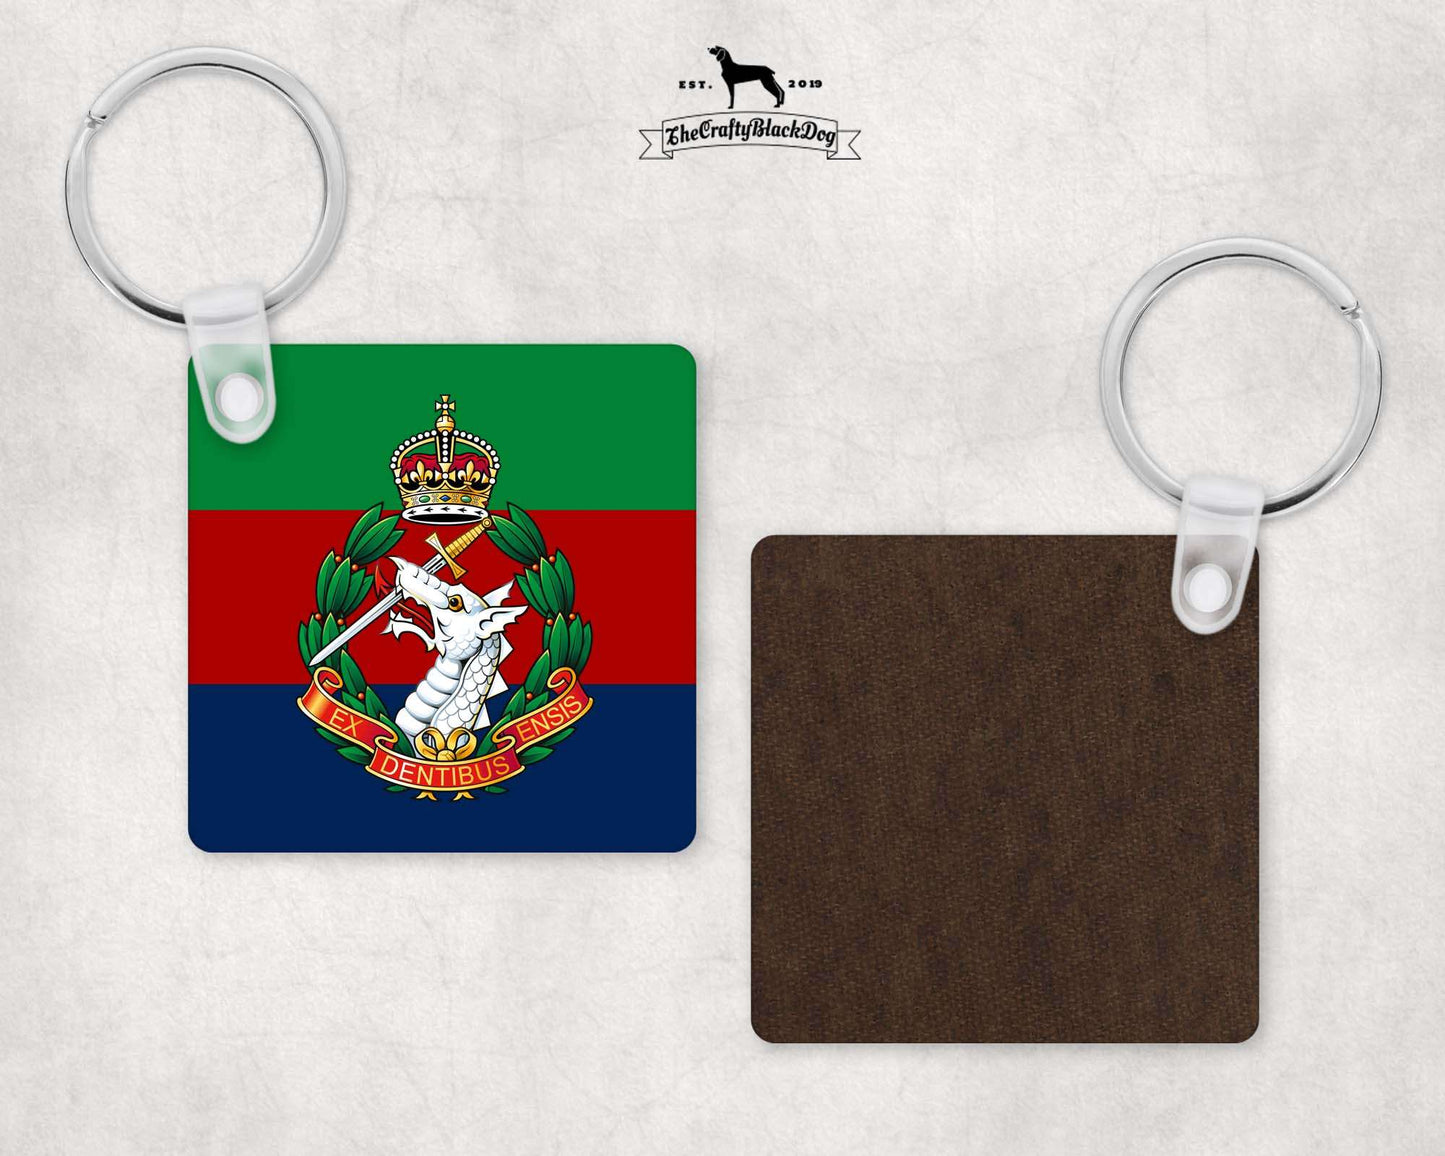 Royal Army Dental Corps - Square Key Ring (King's New Crown)